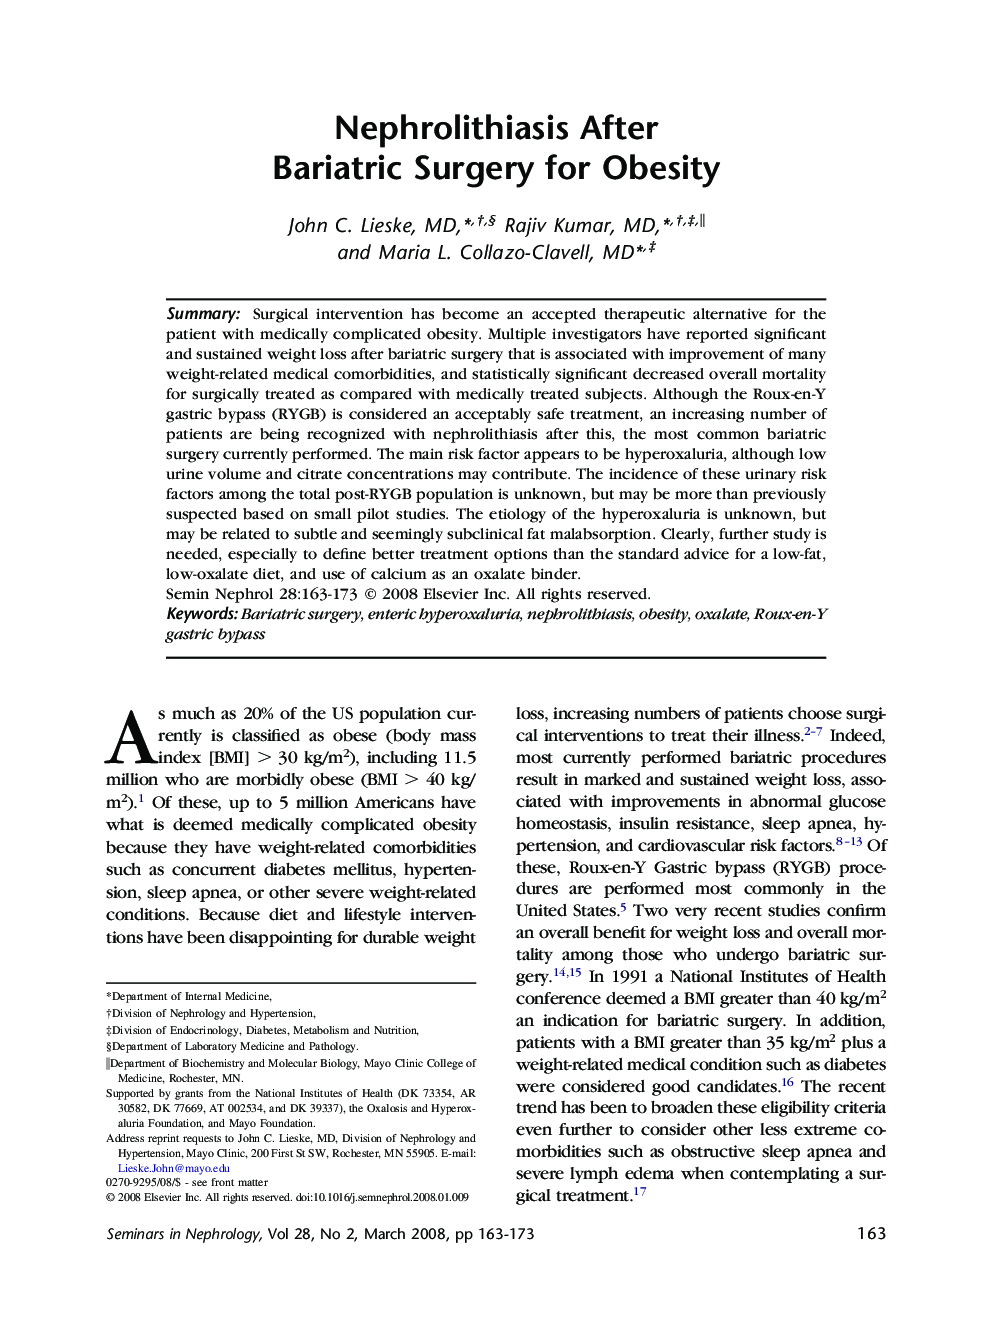 Nephrolithiasis After Bariatric Surgery for Obesity